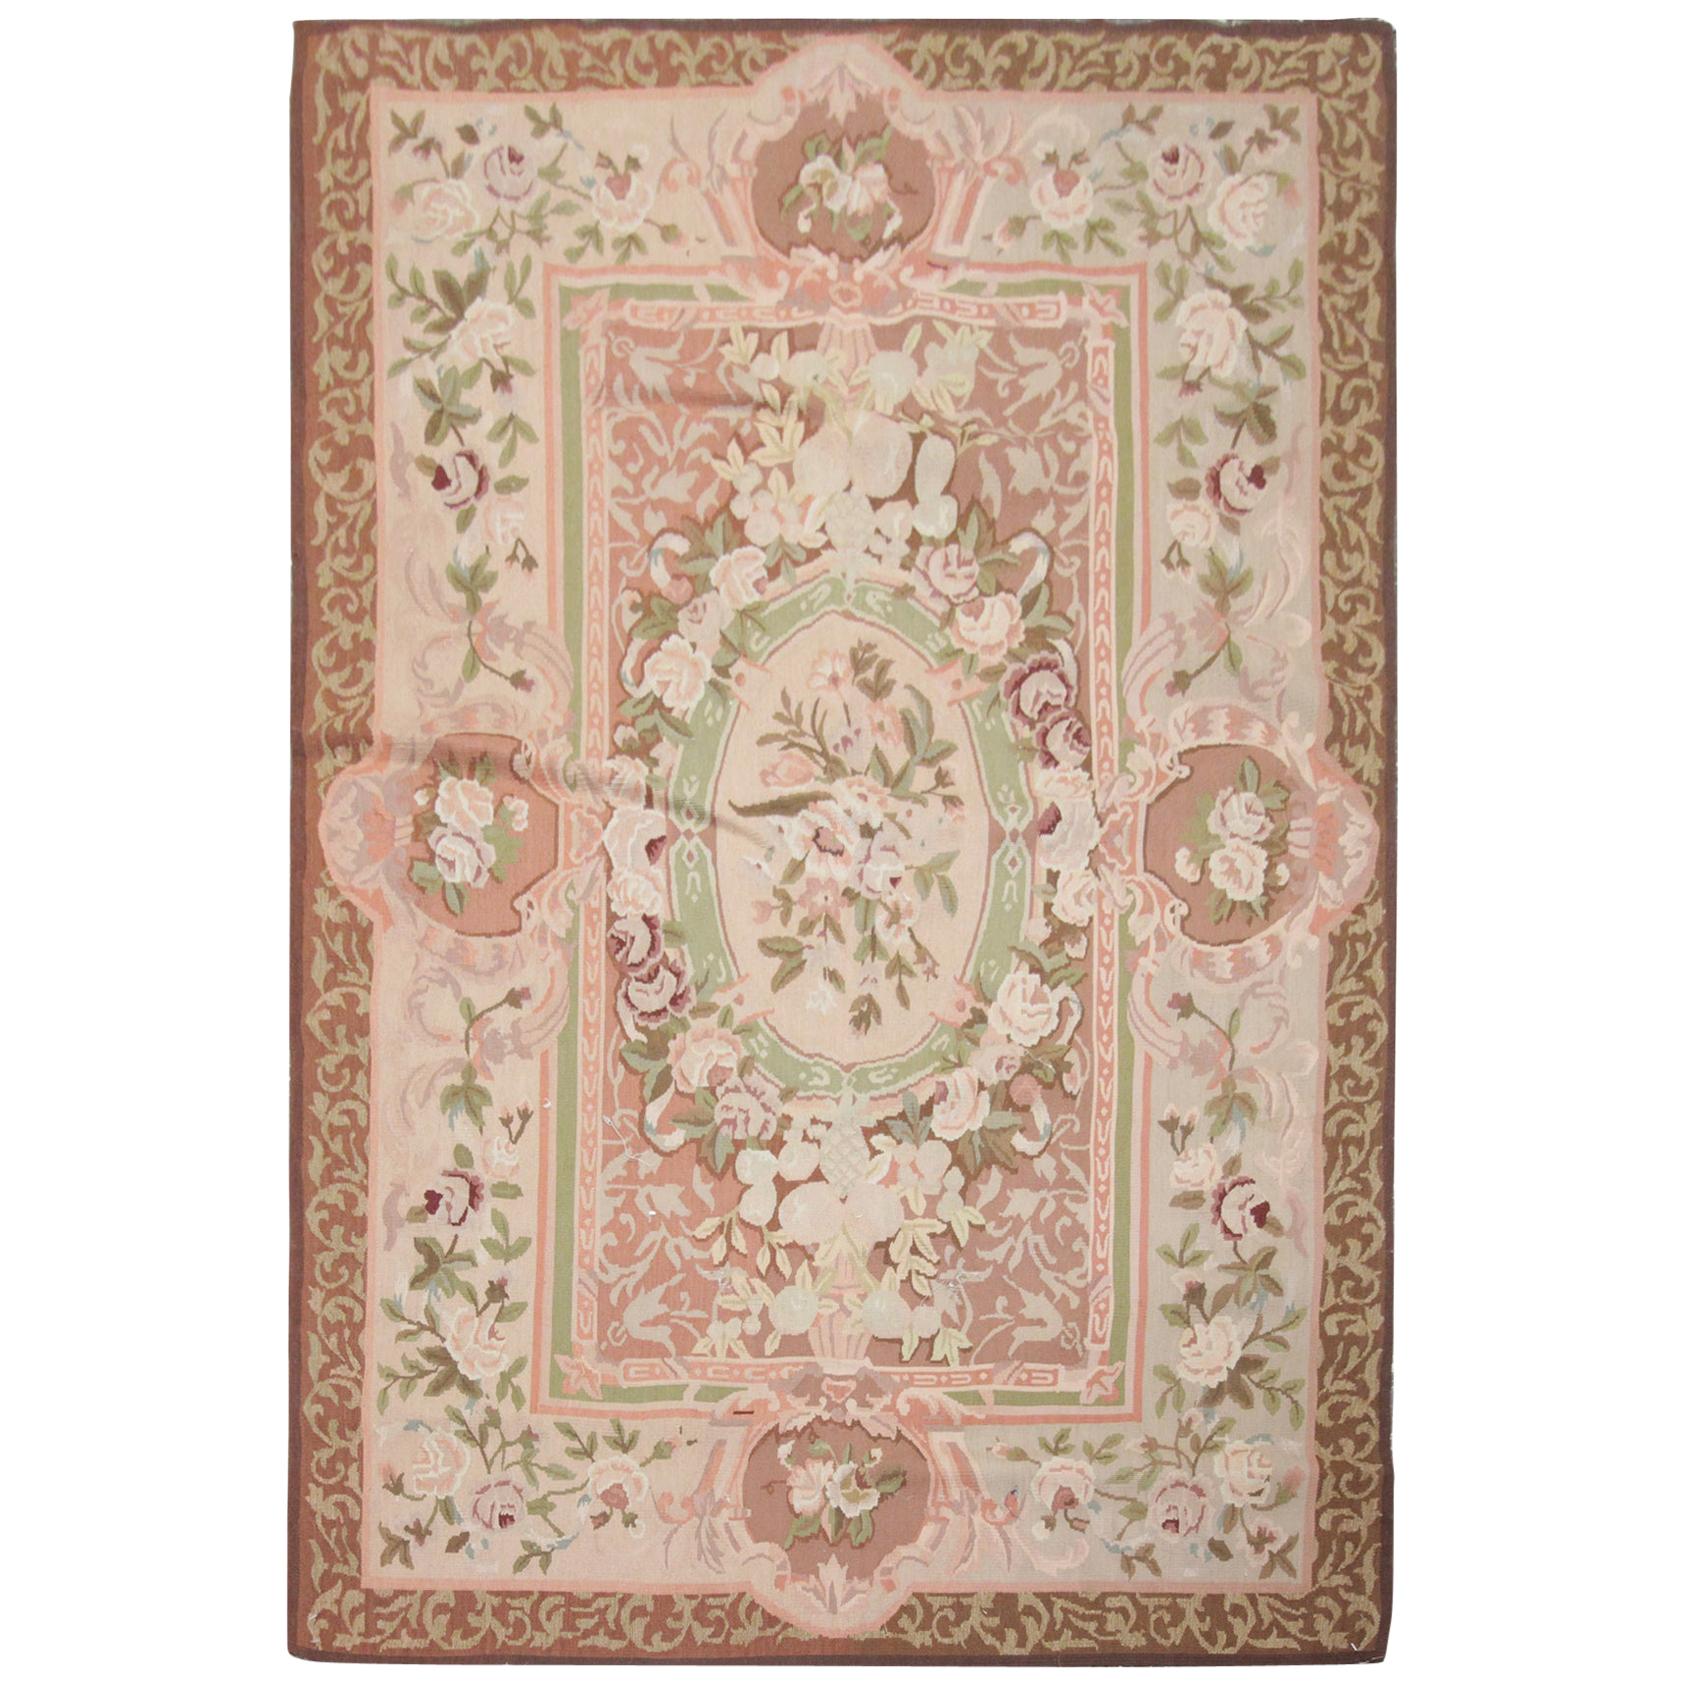 Vintage Aubusson Style Rug French Needlepoint Rug, Handwoven Tapestry Carpet For Sale